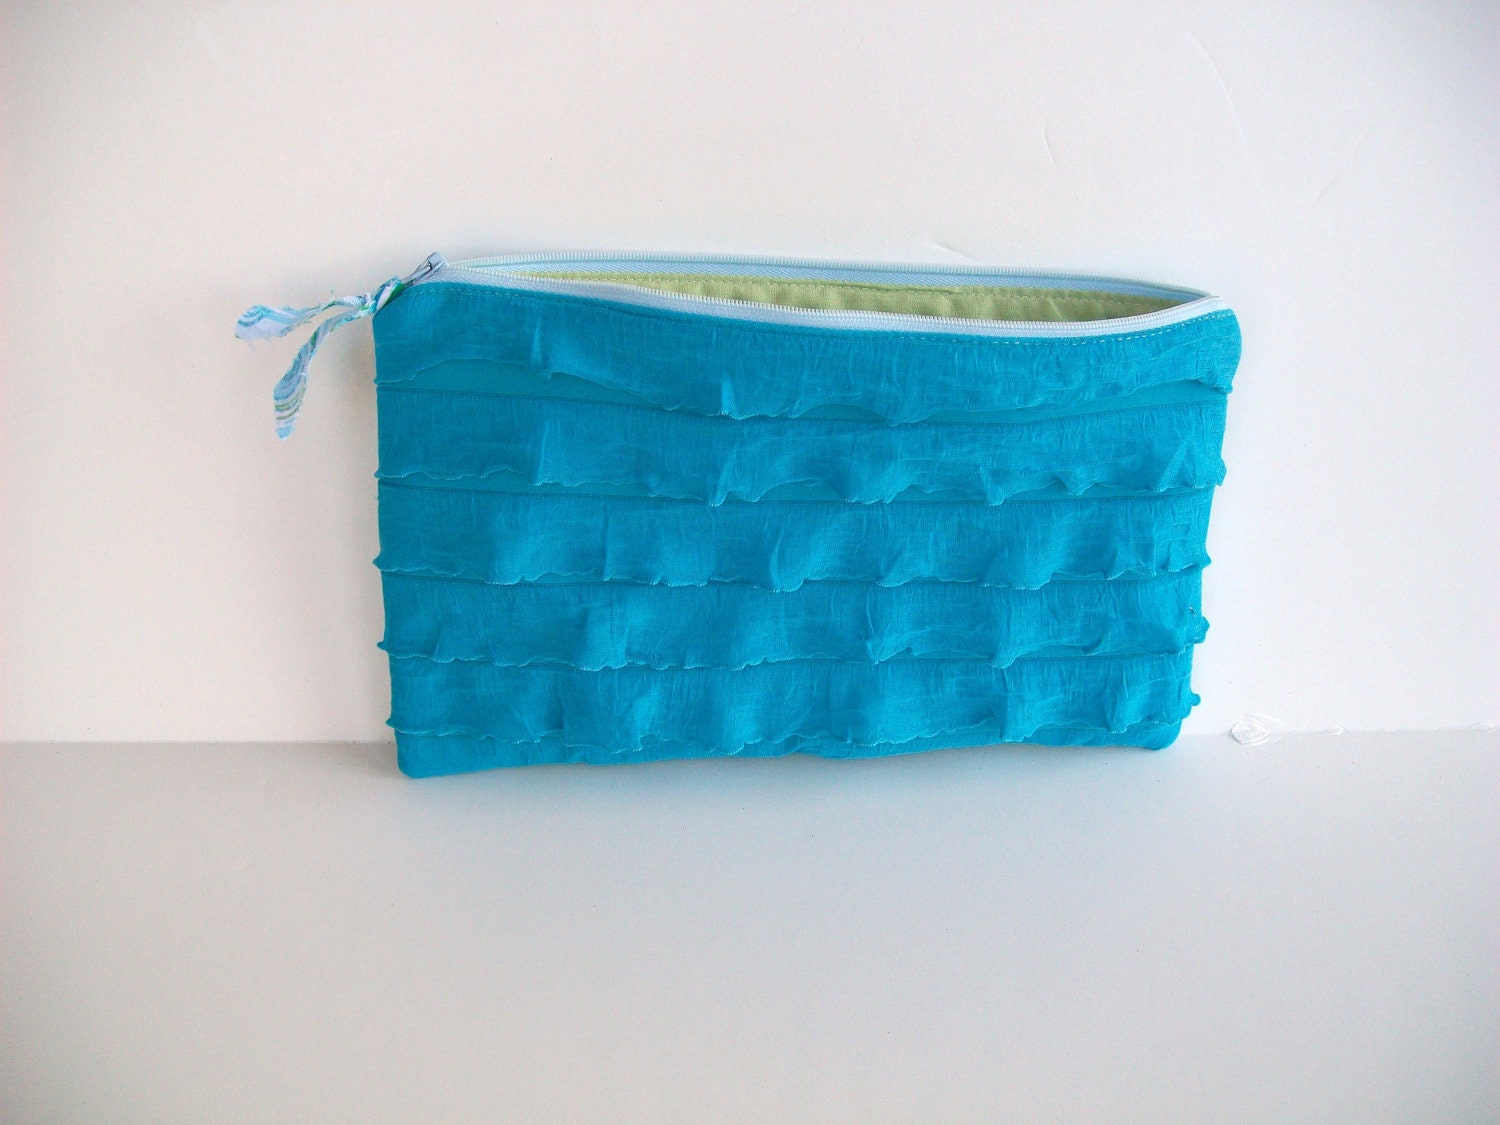 Zipper clutch bag, blue ruffled whimsical, springtime, Birthday, Easter, Mother's day gift for her under 20